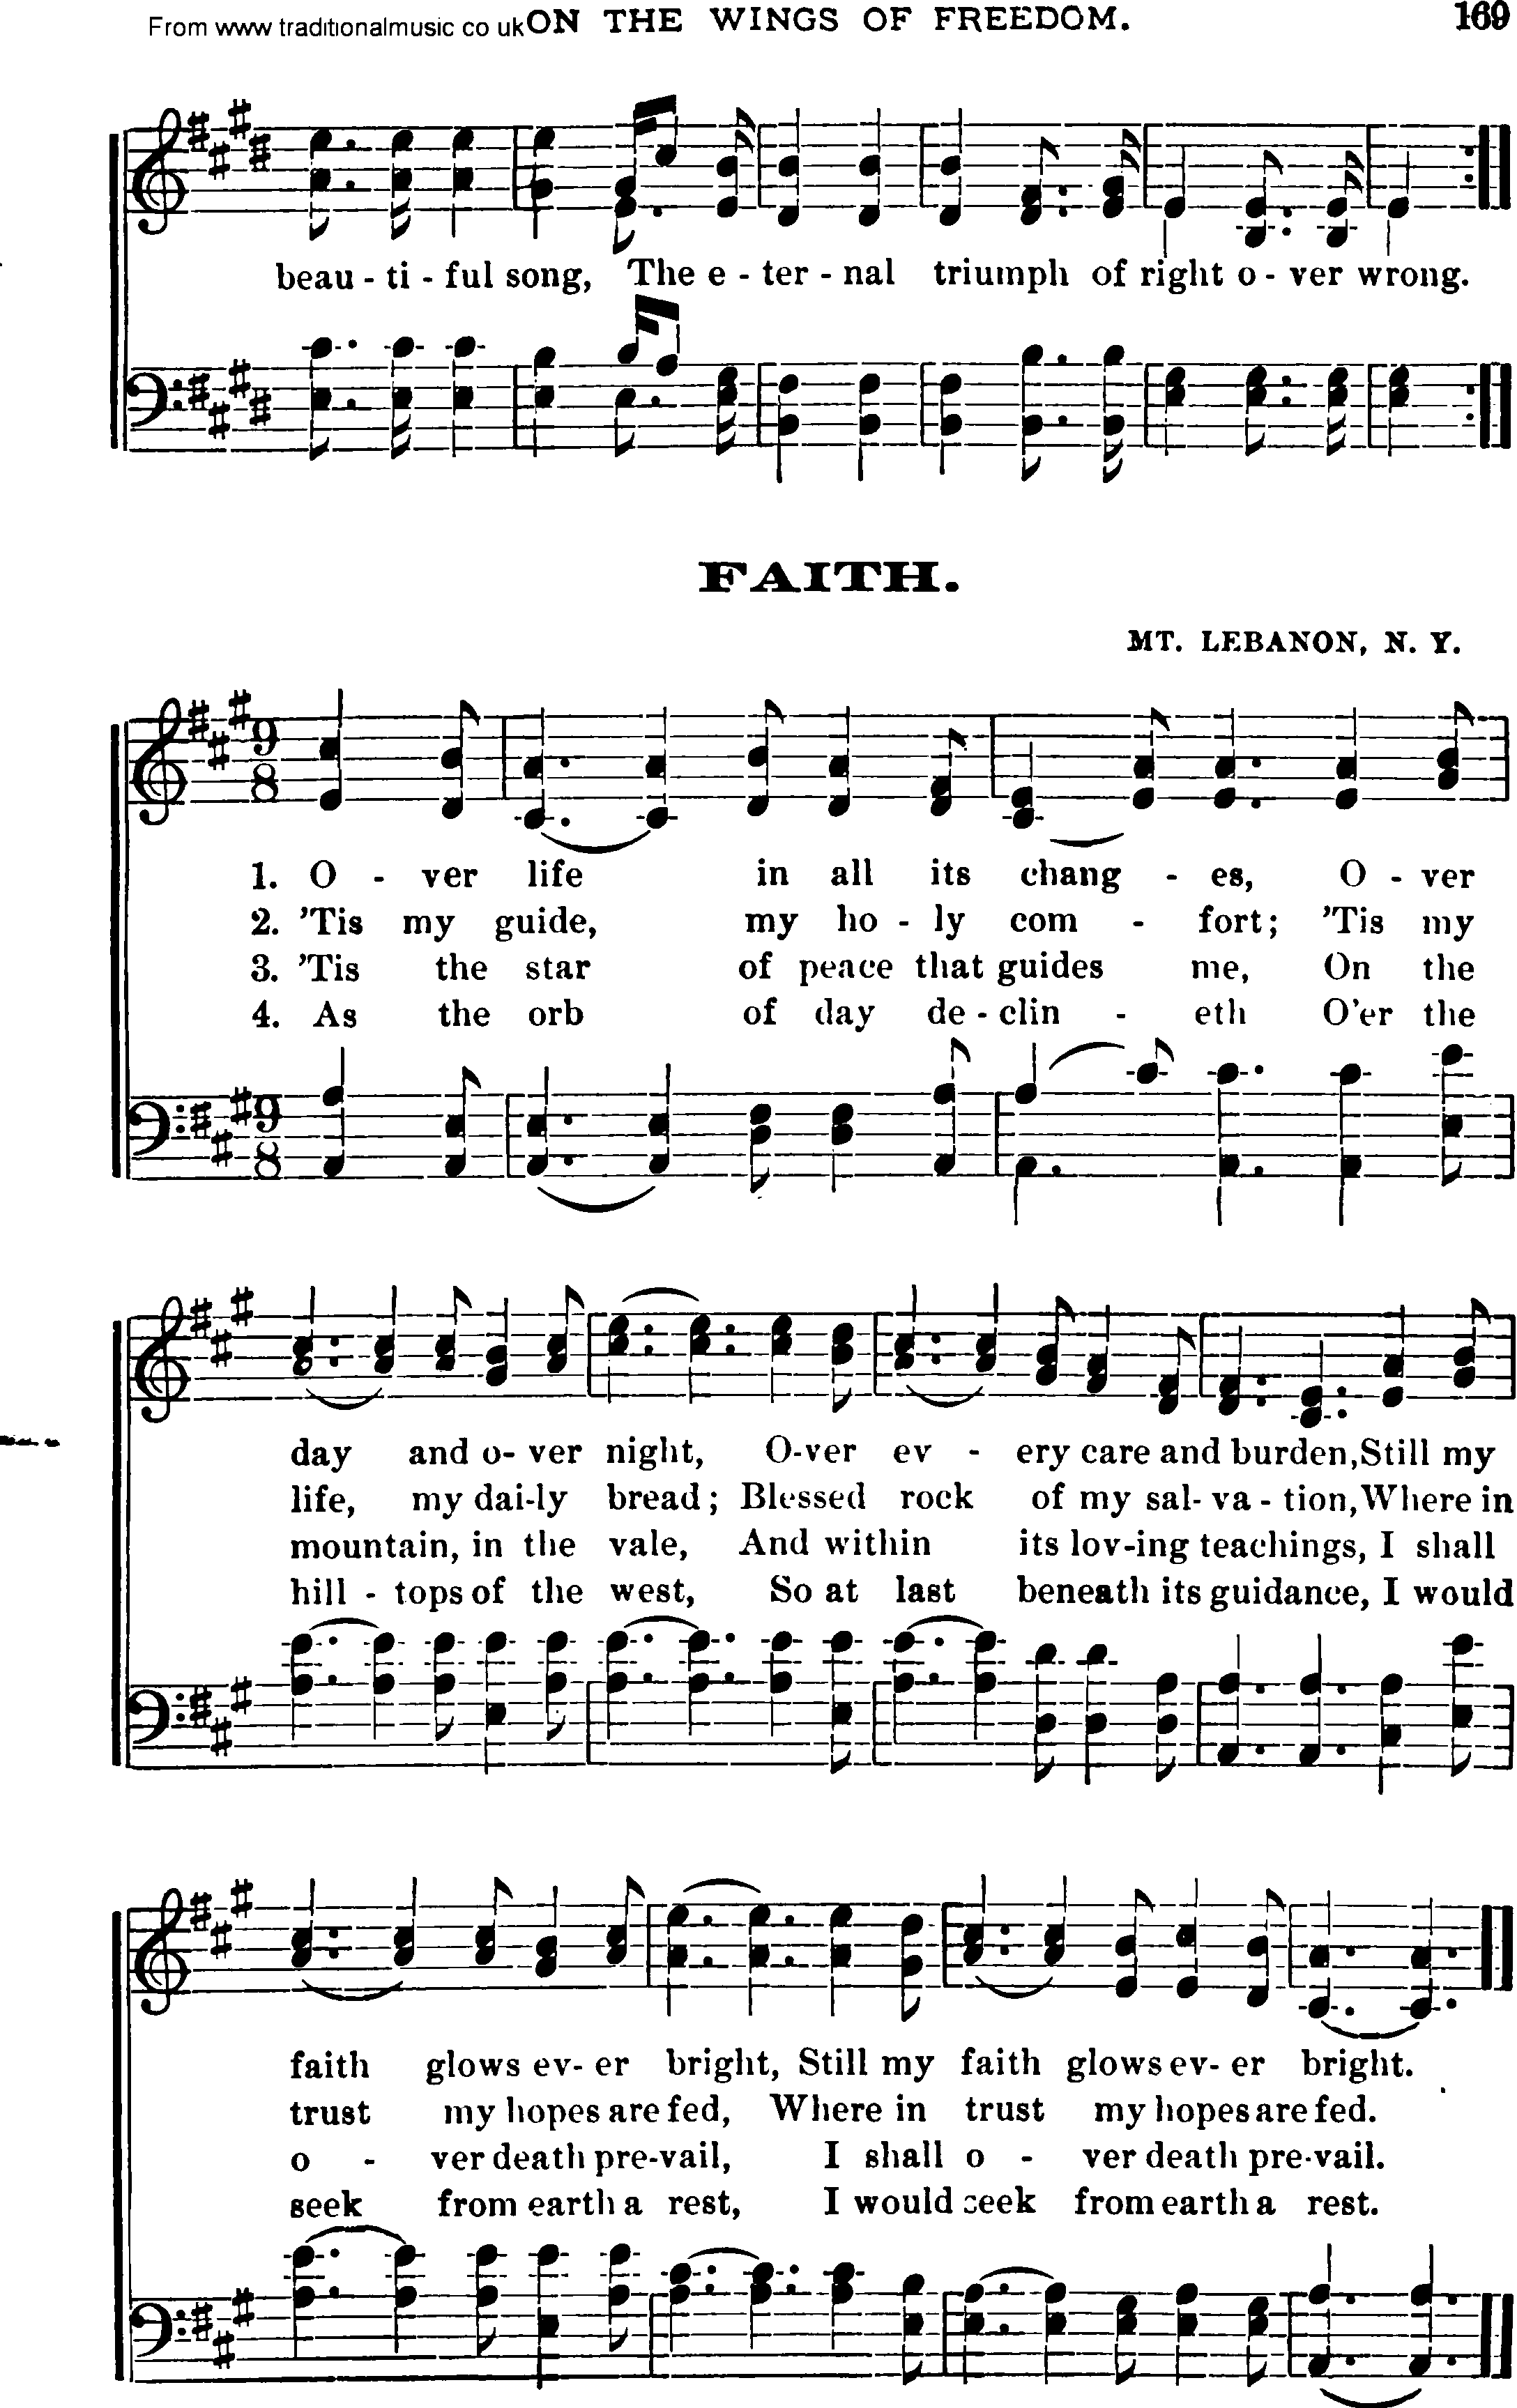 Shaker Music collection, Hymn: Faith, sheetmusic and PDF